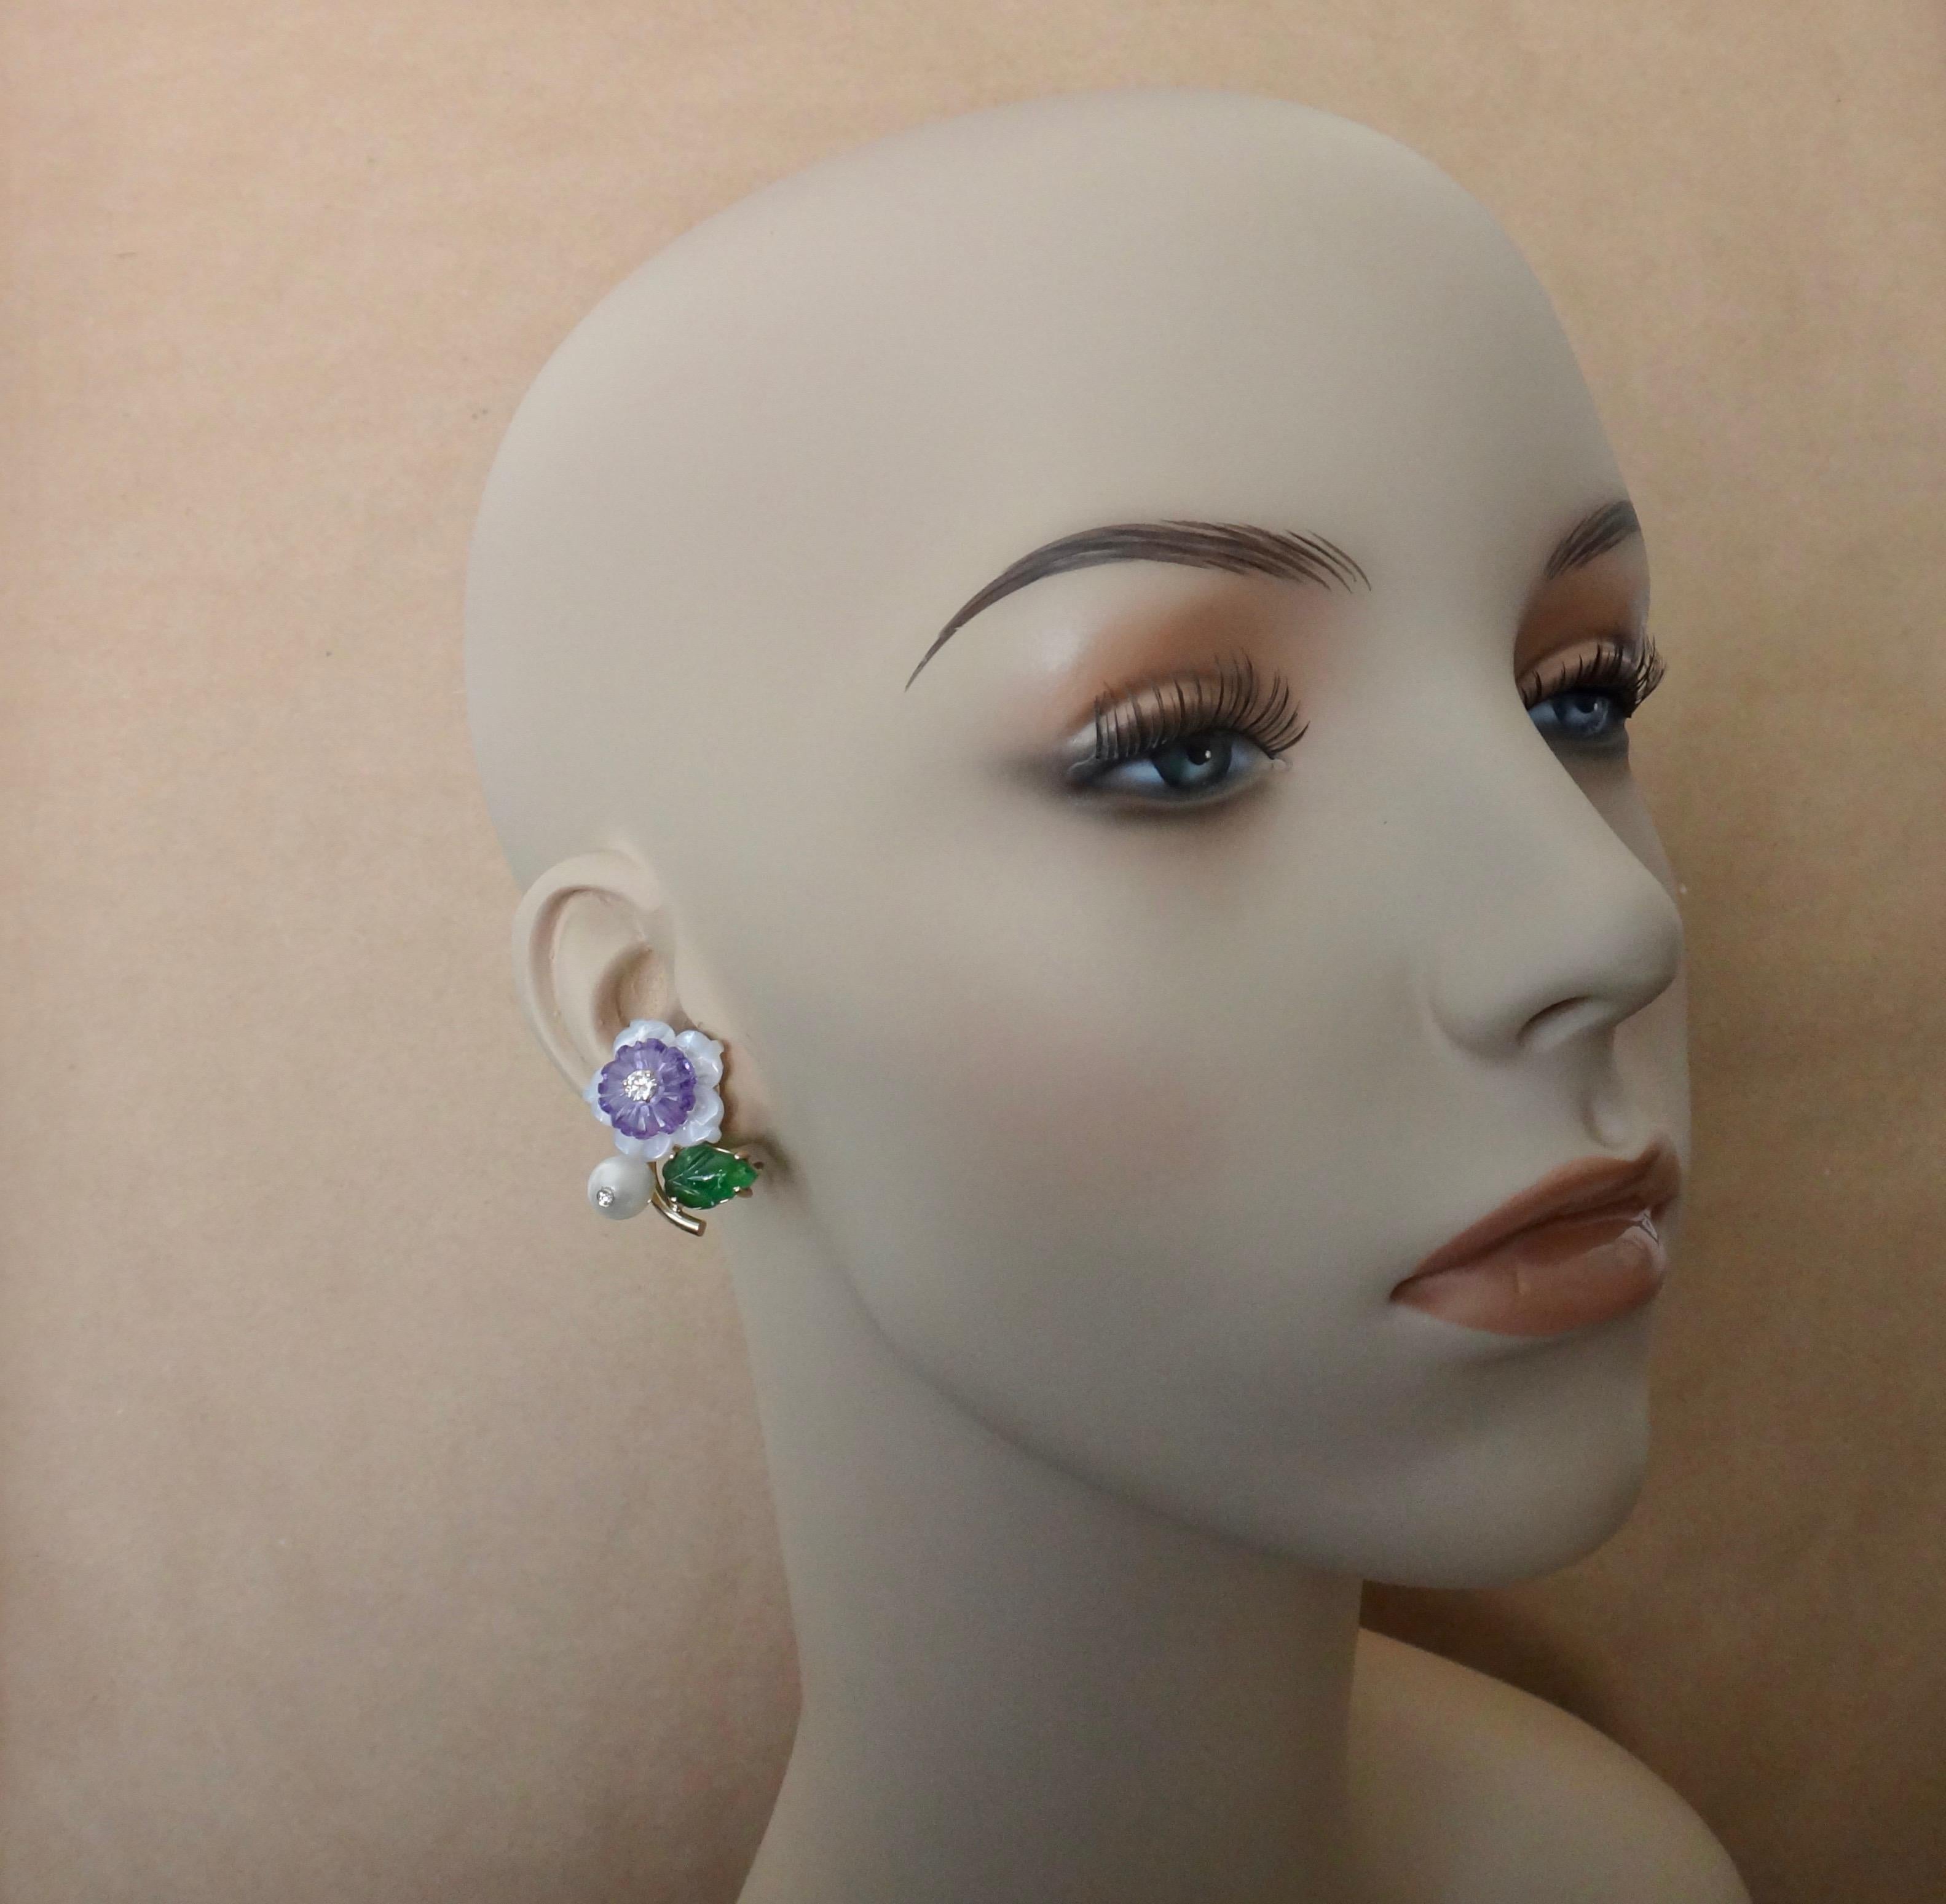 These whimsical flower earrings are reminiscent of compositions dating from the early 20th century.  The blooms are created from carved mother-of-pearl and amethyst along with white diamond centers.  The leaves are carved tsavorite (a green